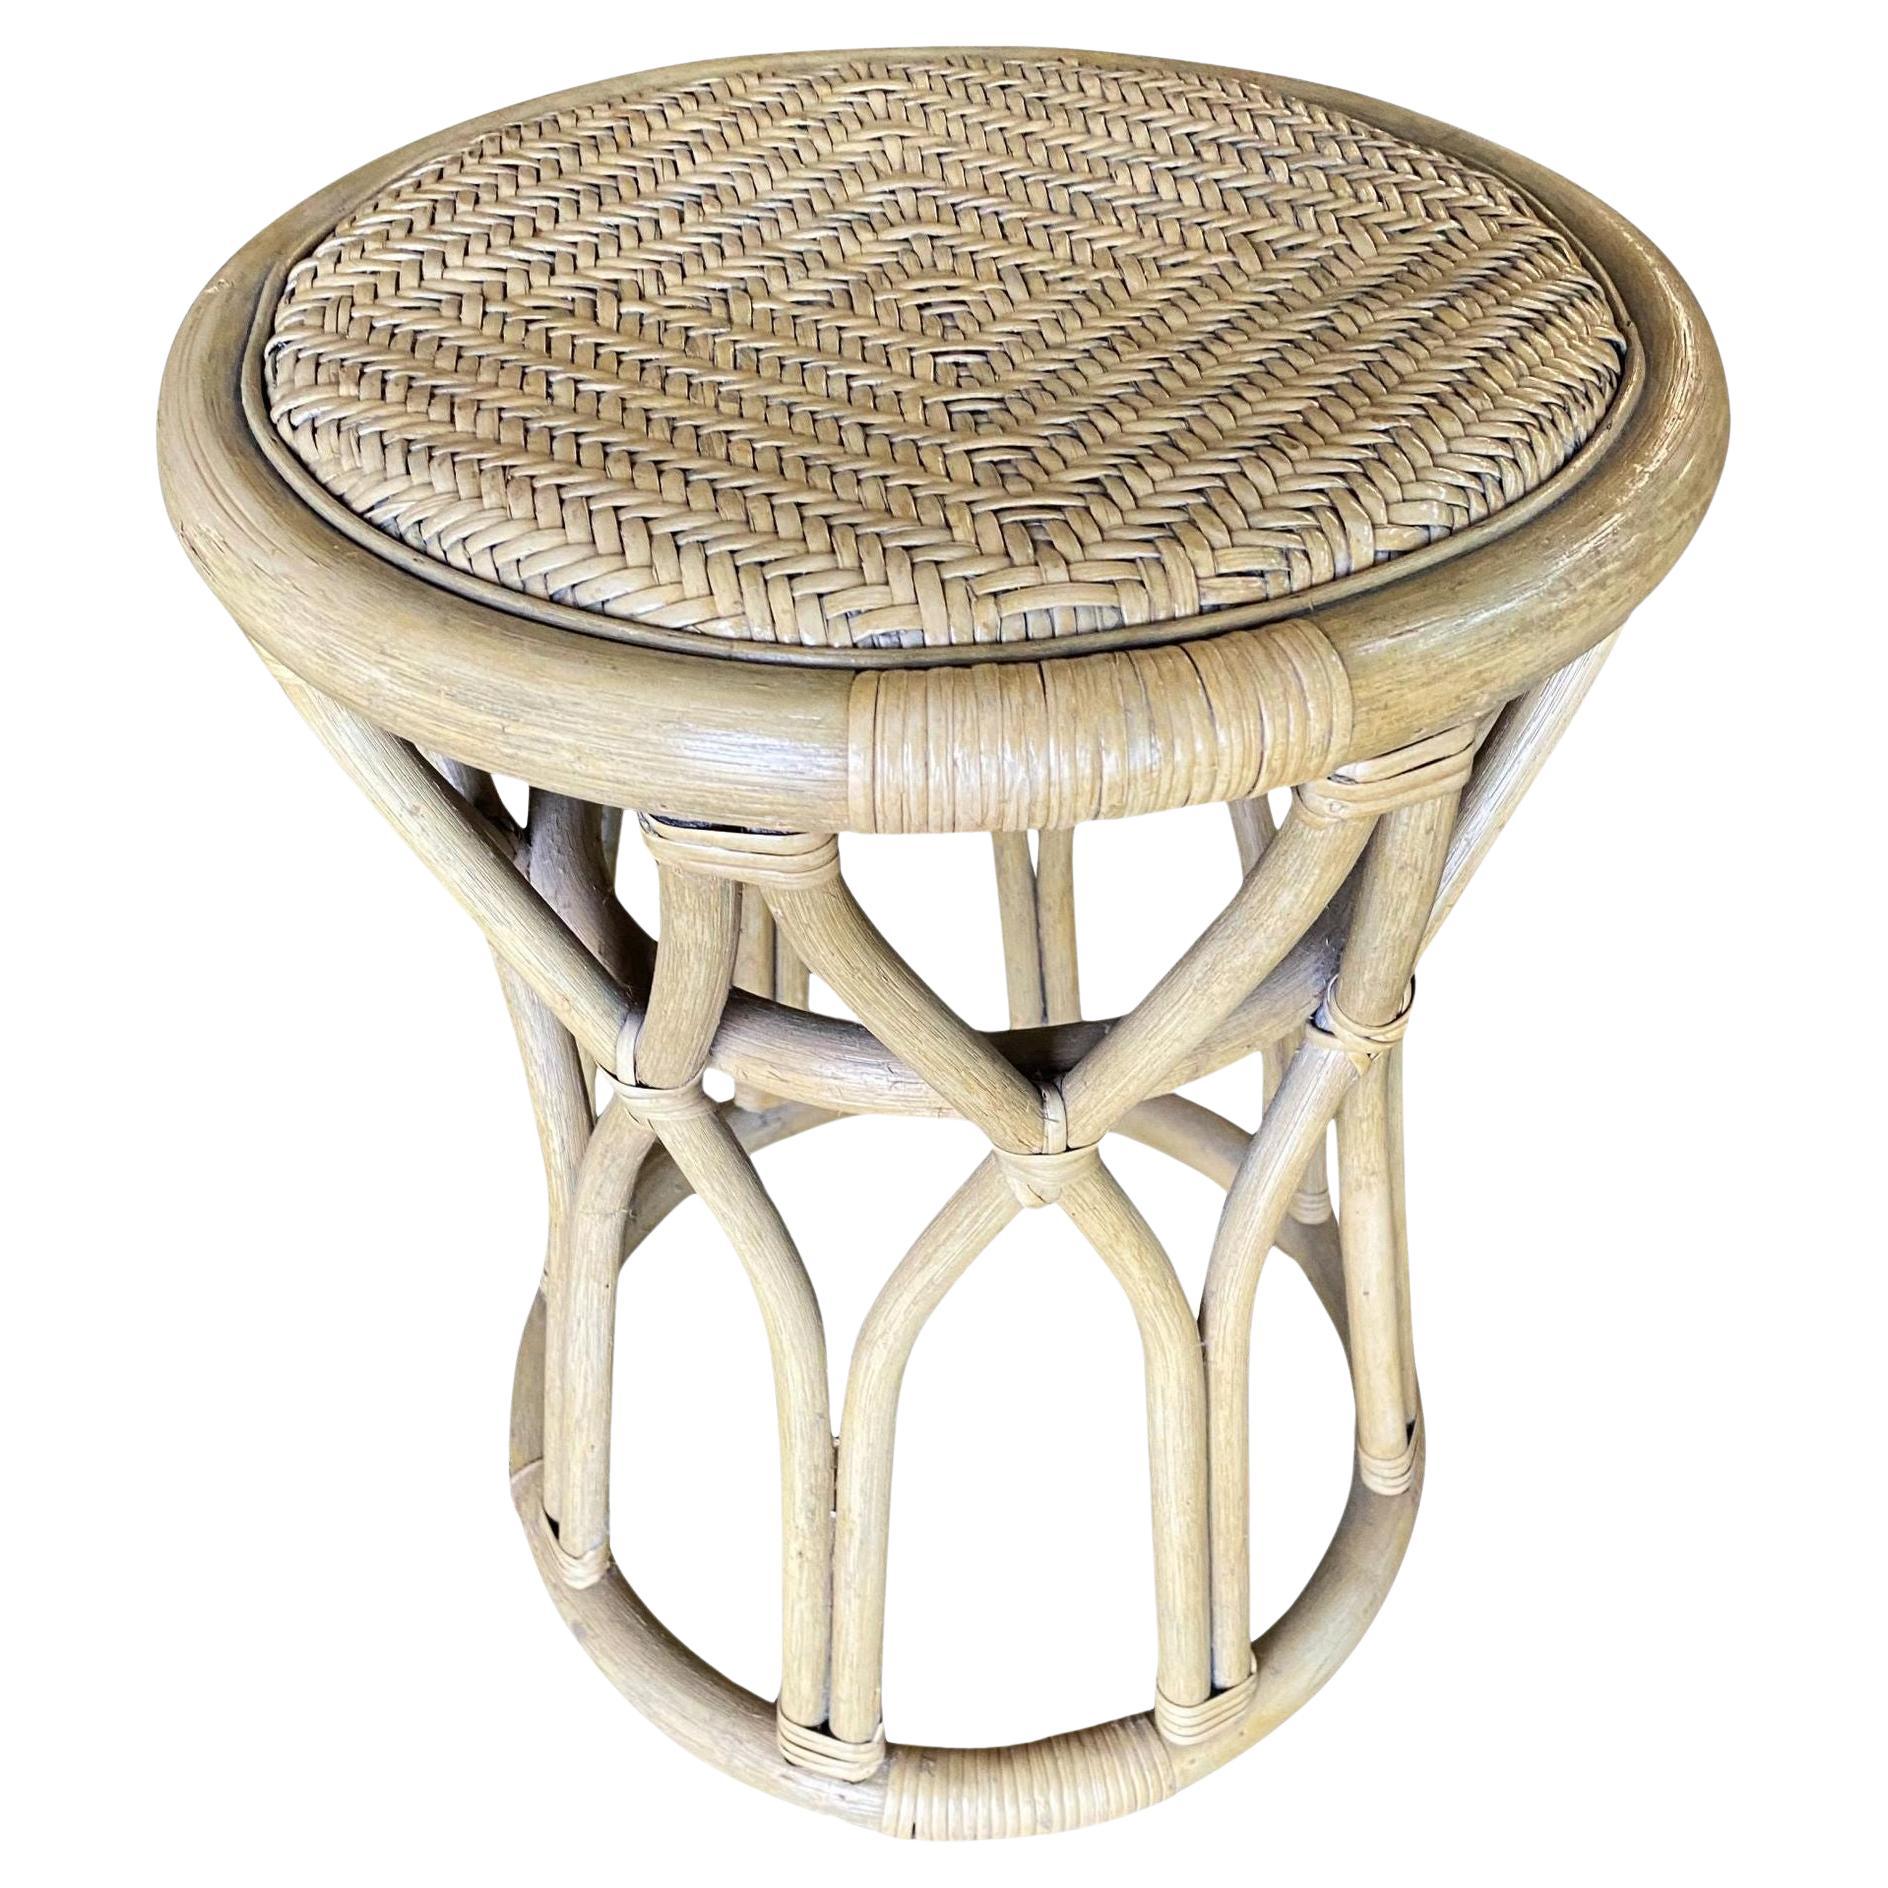 Restored "X" Rattan Vanity Stool with Wicker Seat For Sale